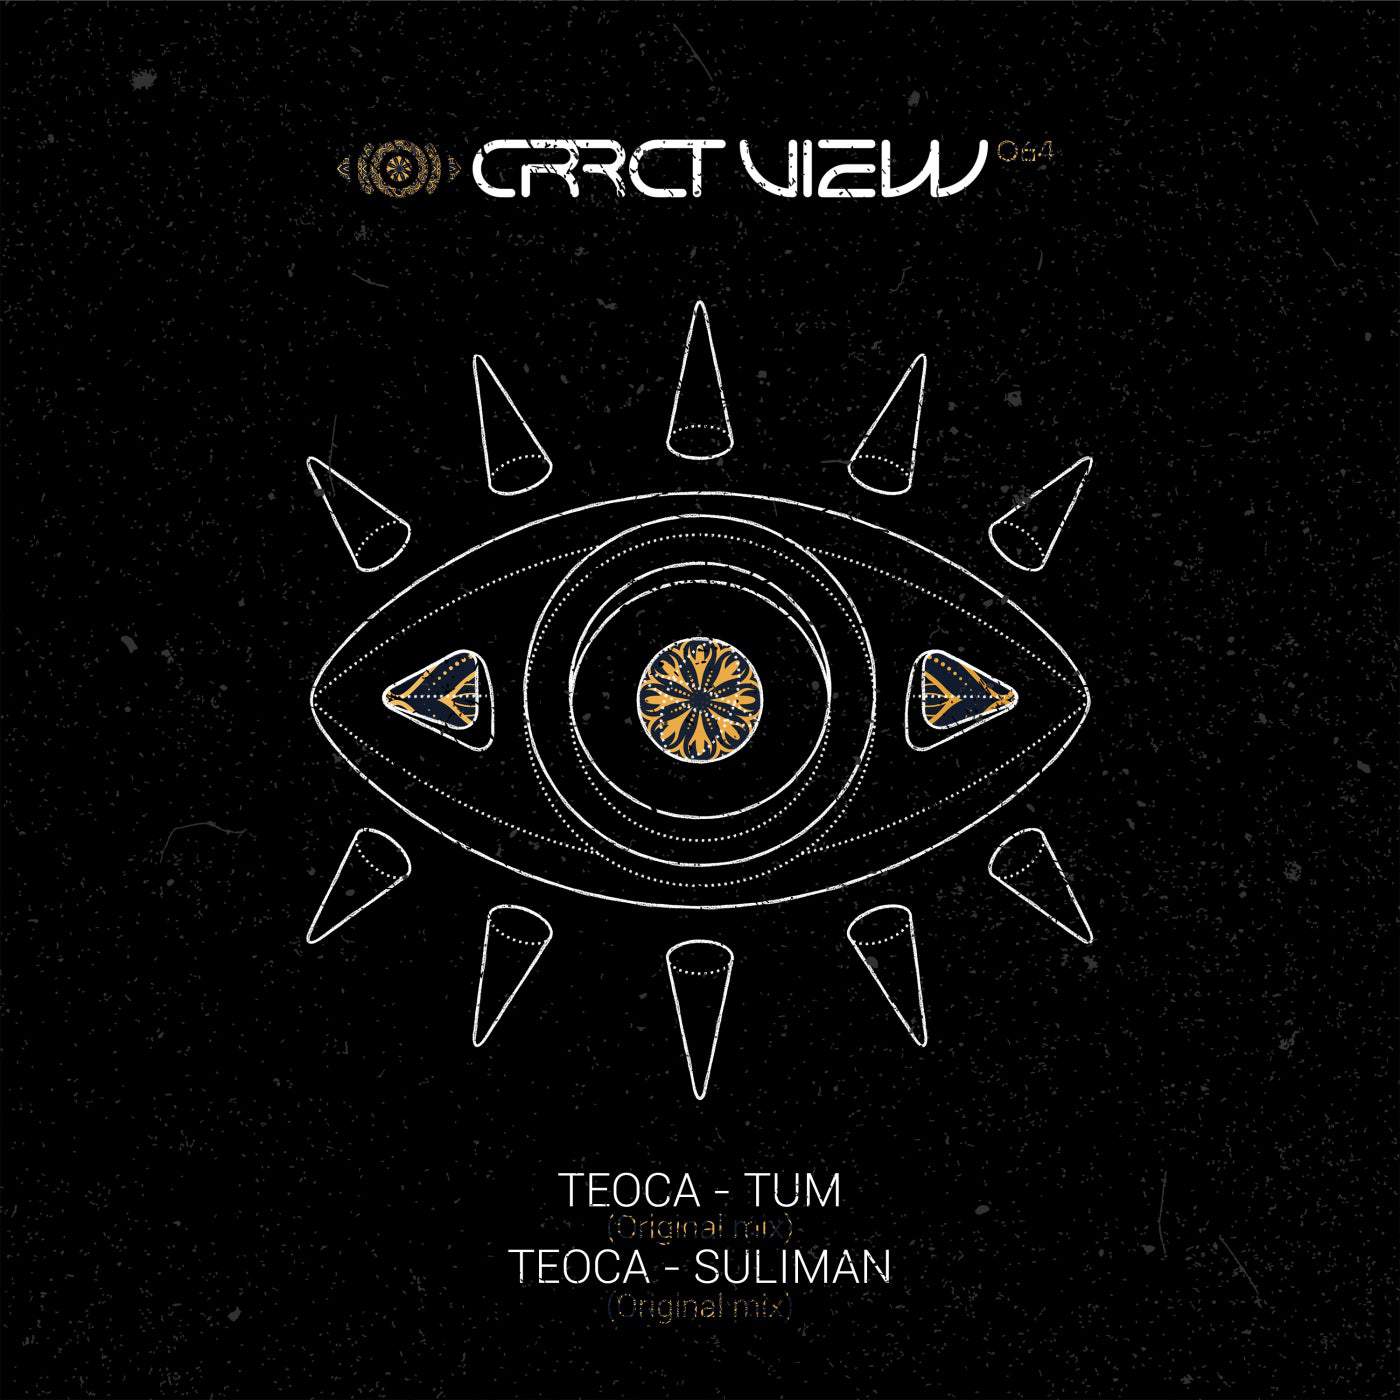 image cover: Tum by TeOca on CRRCT VIEW